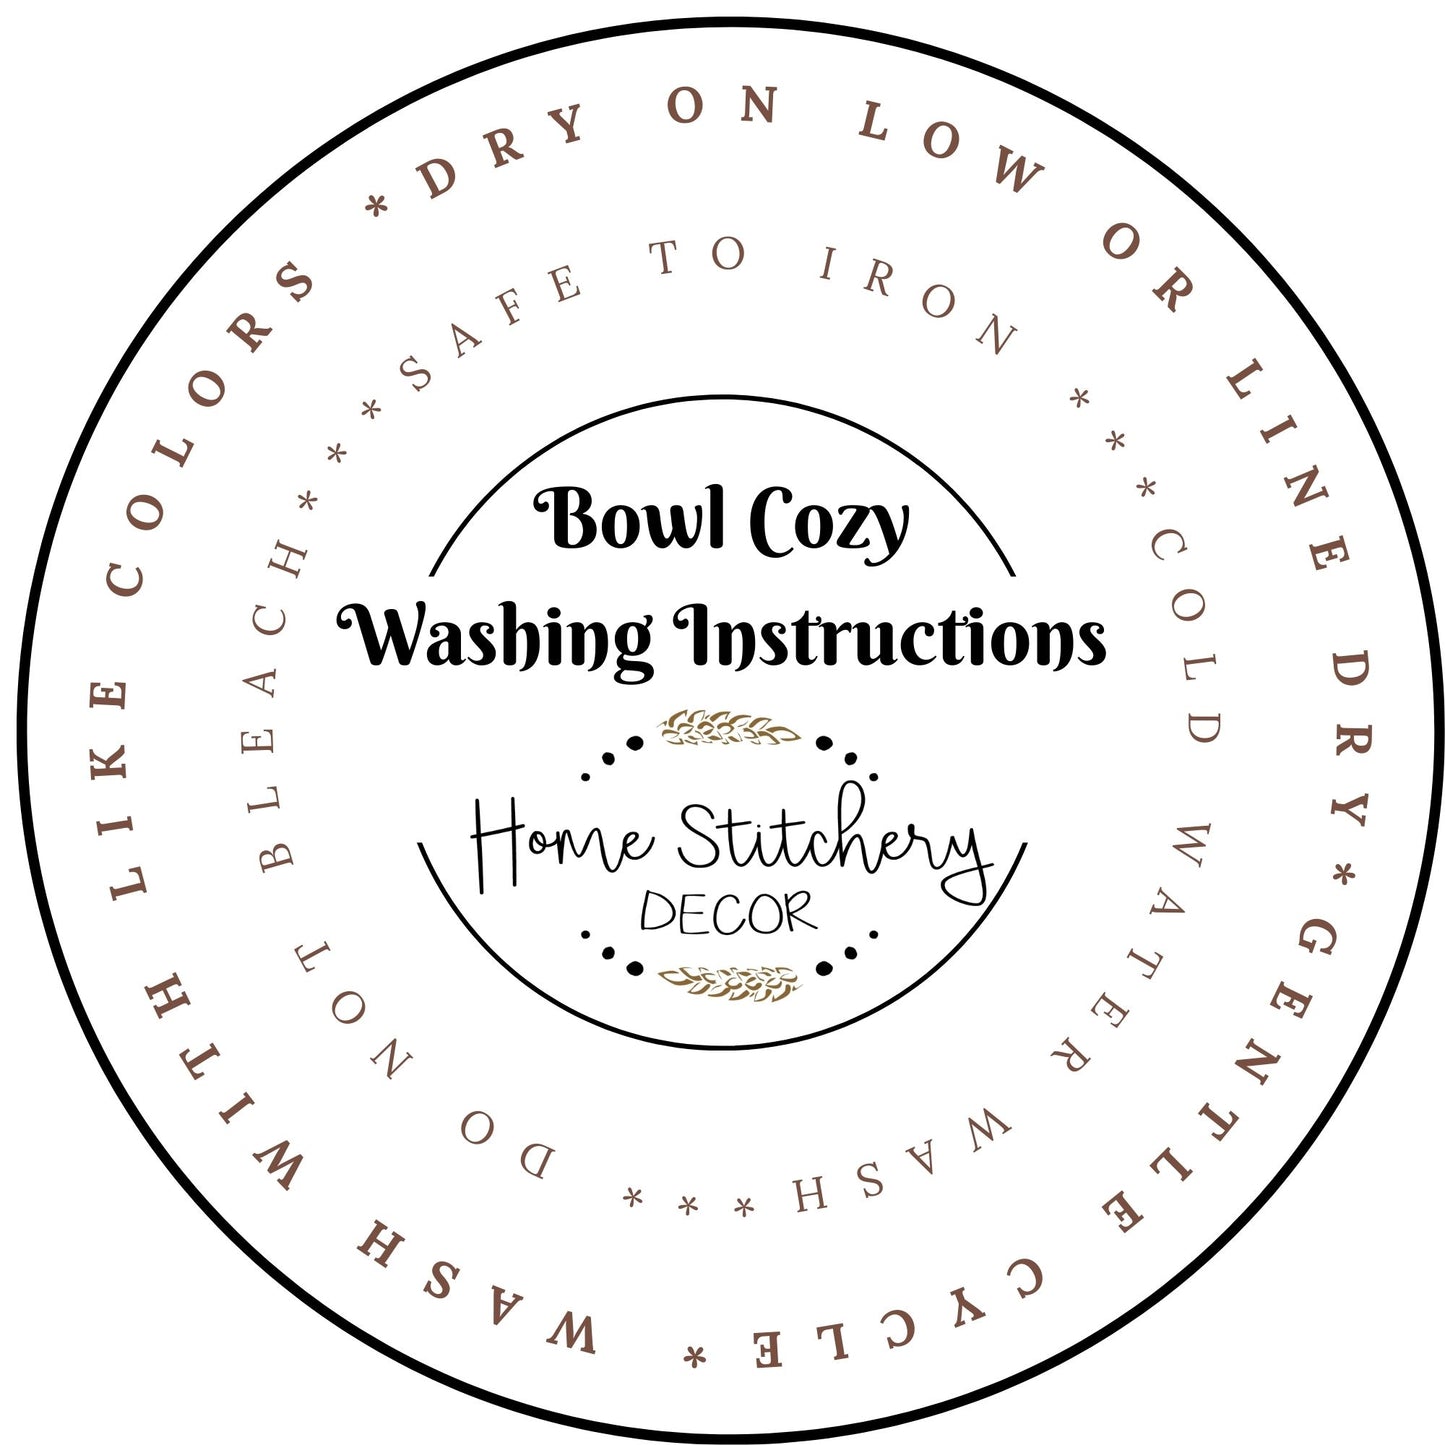 Washing Instructions for Microwave Soup Bowl Cozy. Wash your Soup Cozy in cool water, line dry or dry on low. Gentle cycle only. Do not bleach. Safe to Iron.